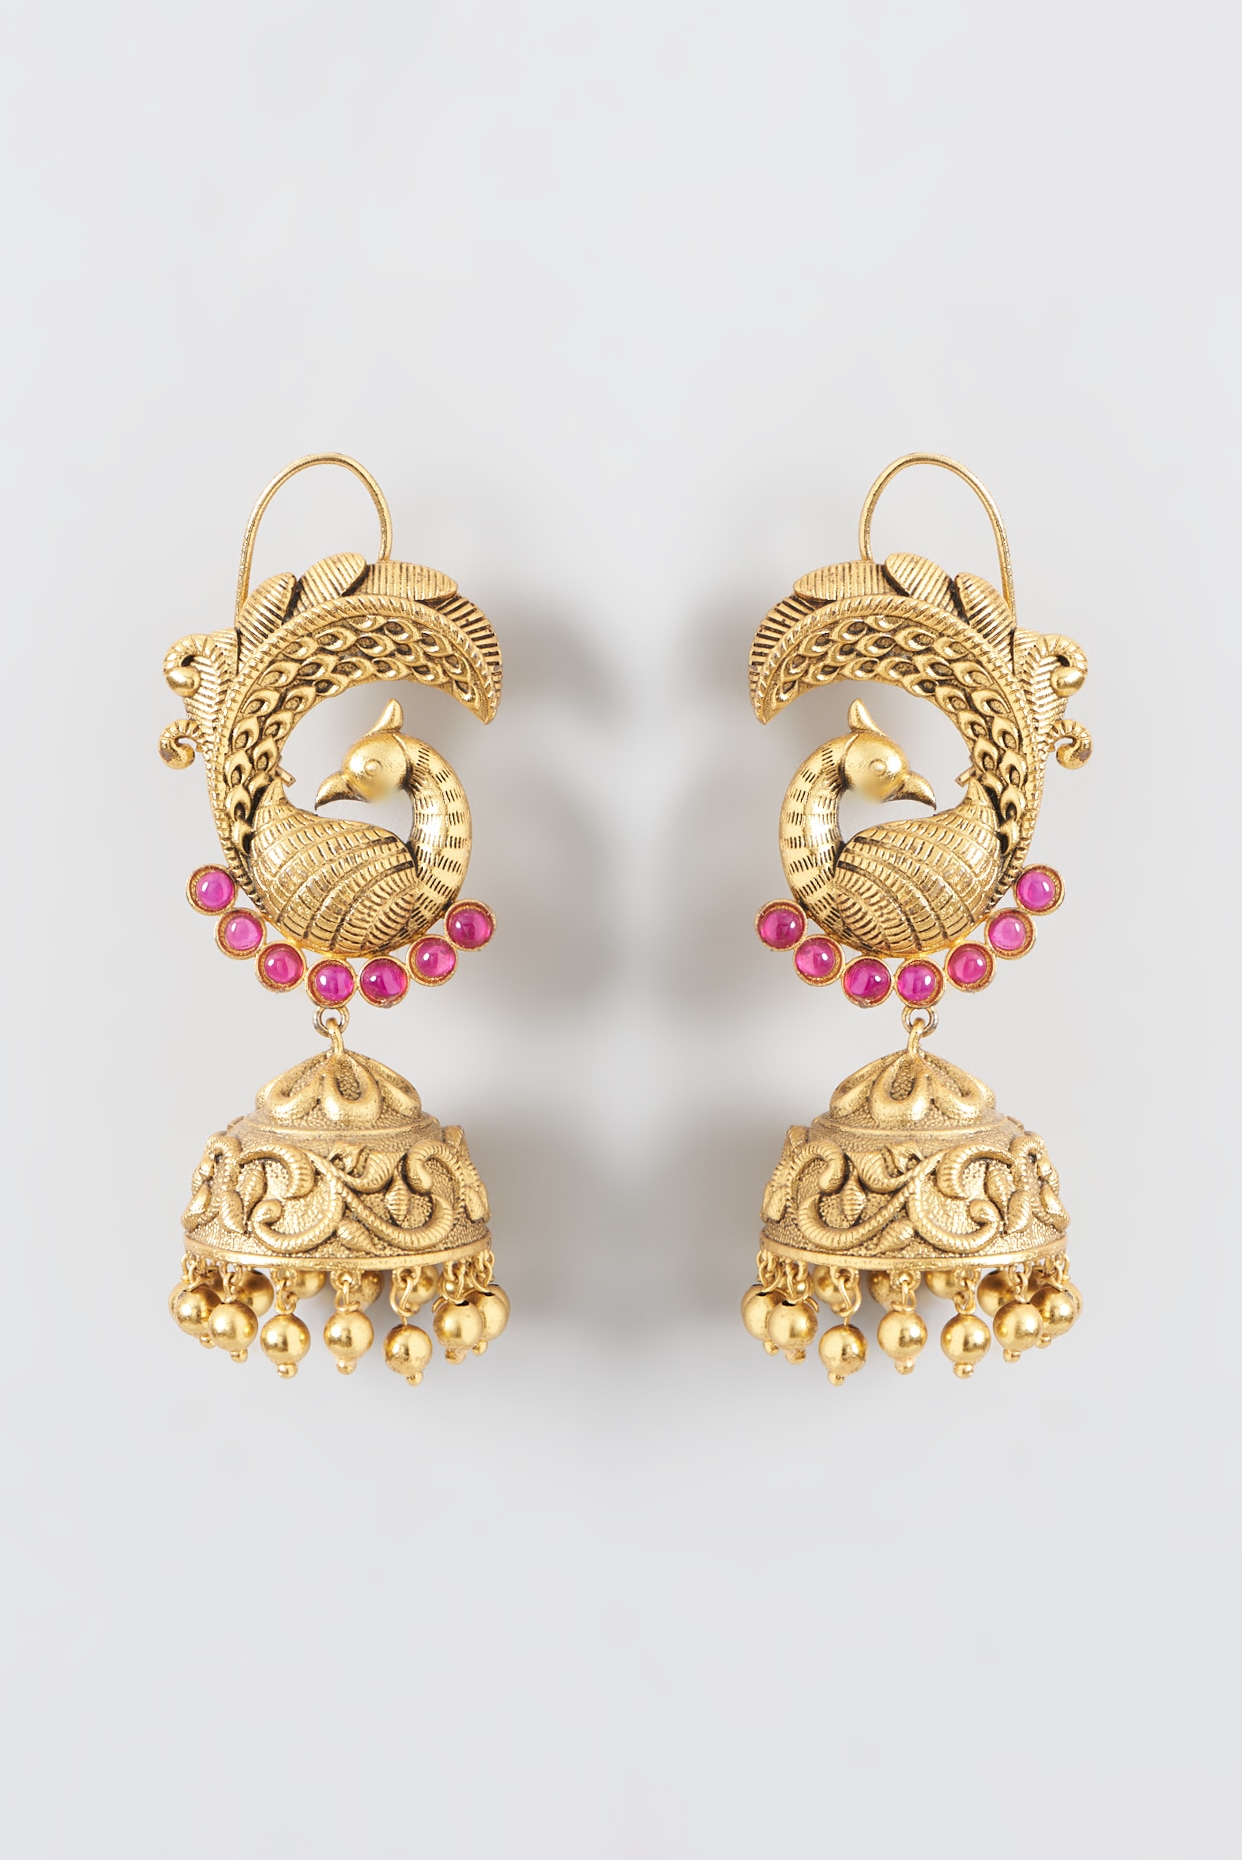 Affordable Latest Gold Jhumka Designs Are Here • South India Jewels |  Temple jewellery earrings, Gold bangles design, Gold earrings models